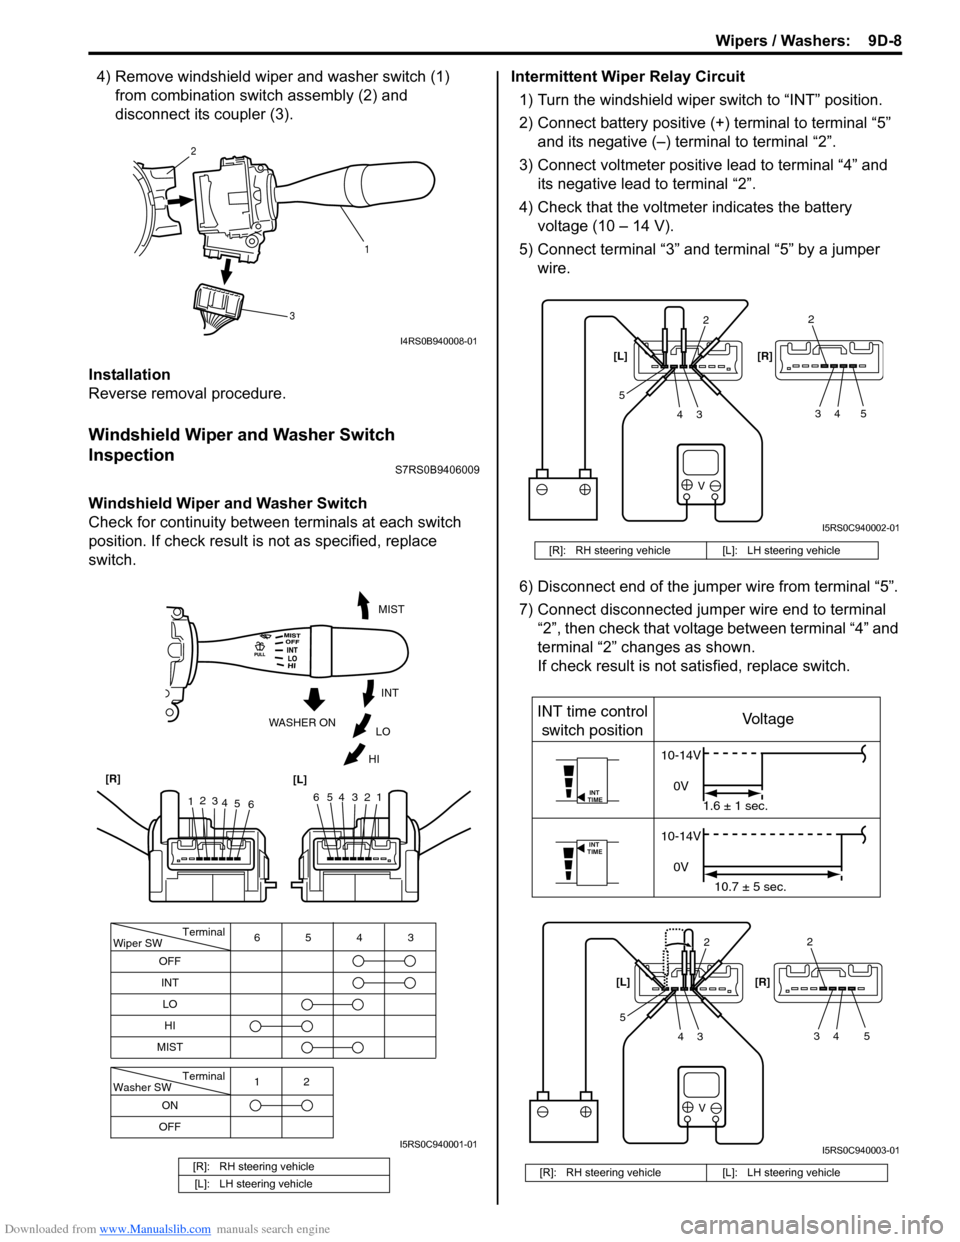 SUZUKI SWIFT 2008 2.G Service Workshop Manual Downloaded from www.Manualslib.com manuals search engine Wipers / Washers:  9D-8
4) Remove windshield wiper and washer switch (1) from combination swit ch assembly (2) and 
disconnect its coupler (3).